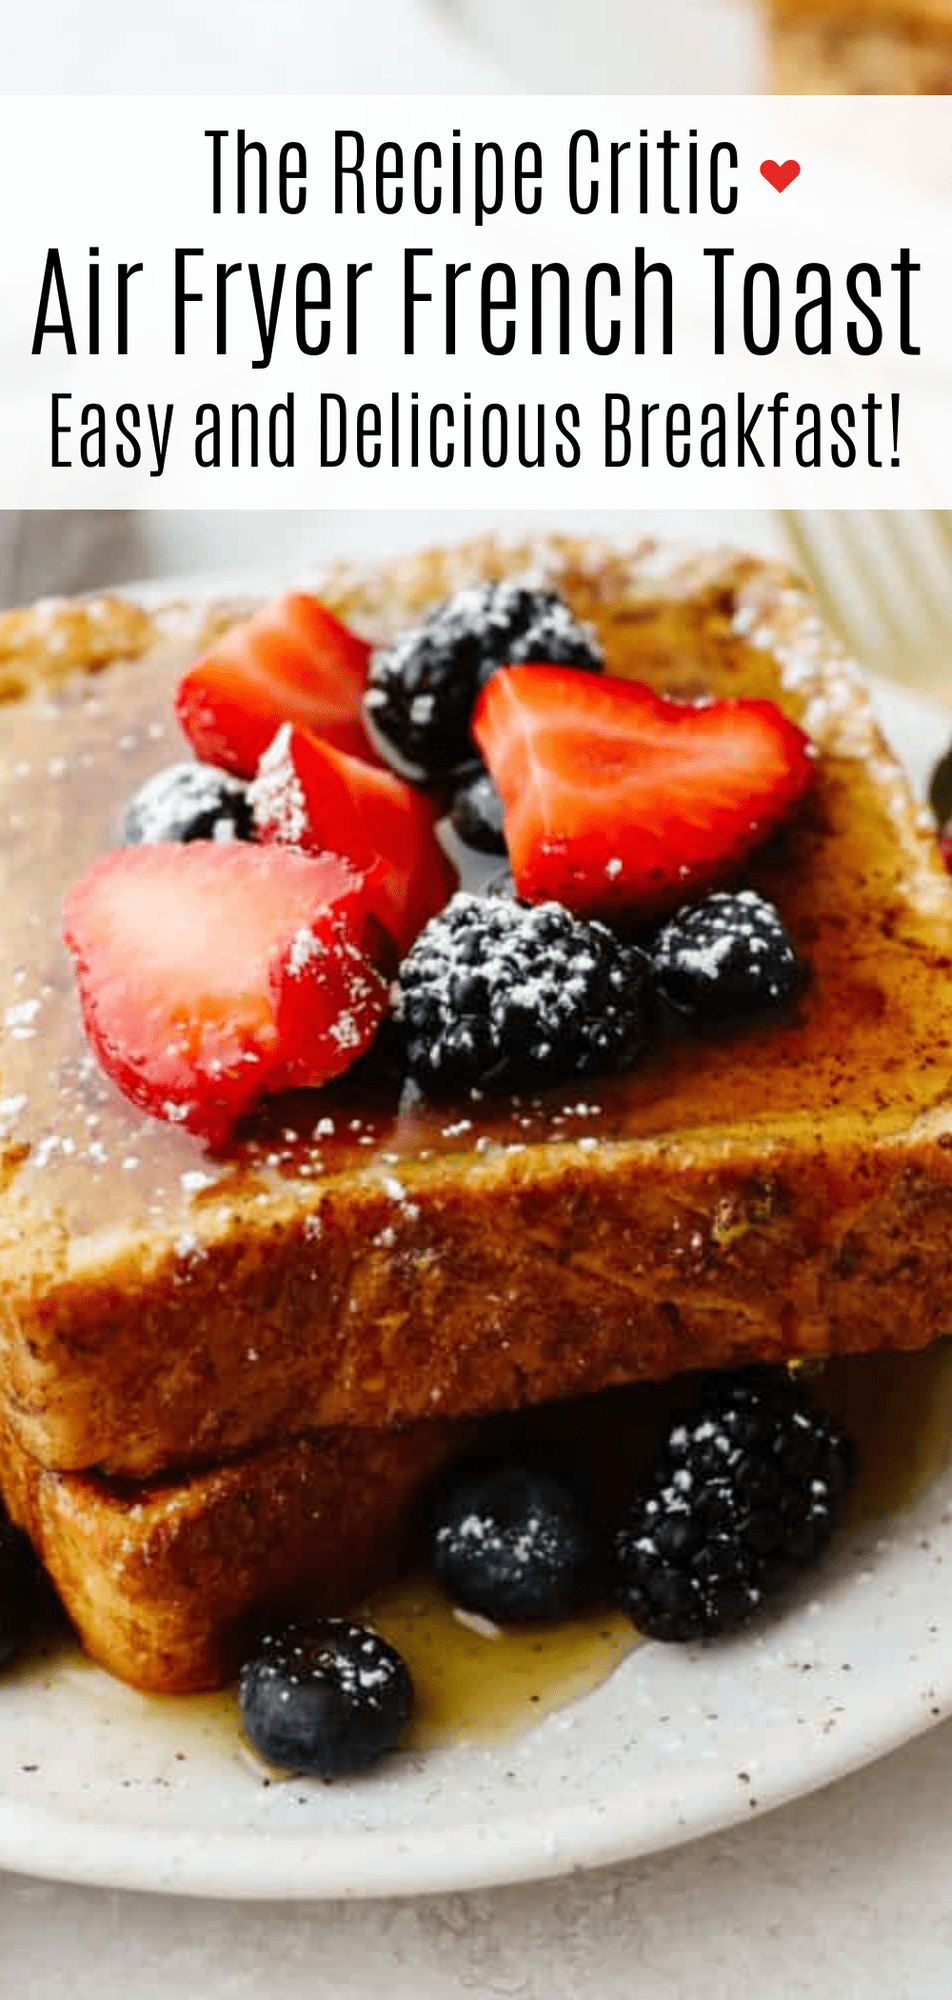 Air Fryer French Toast The Recipe Critic